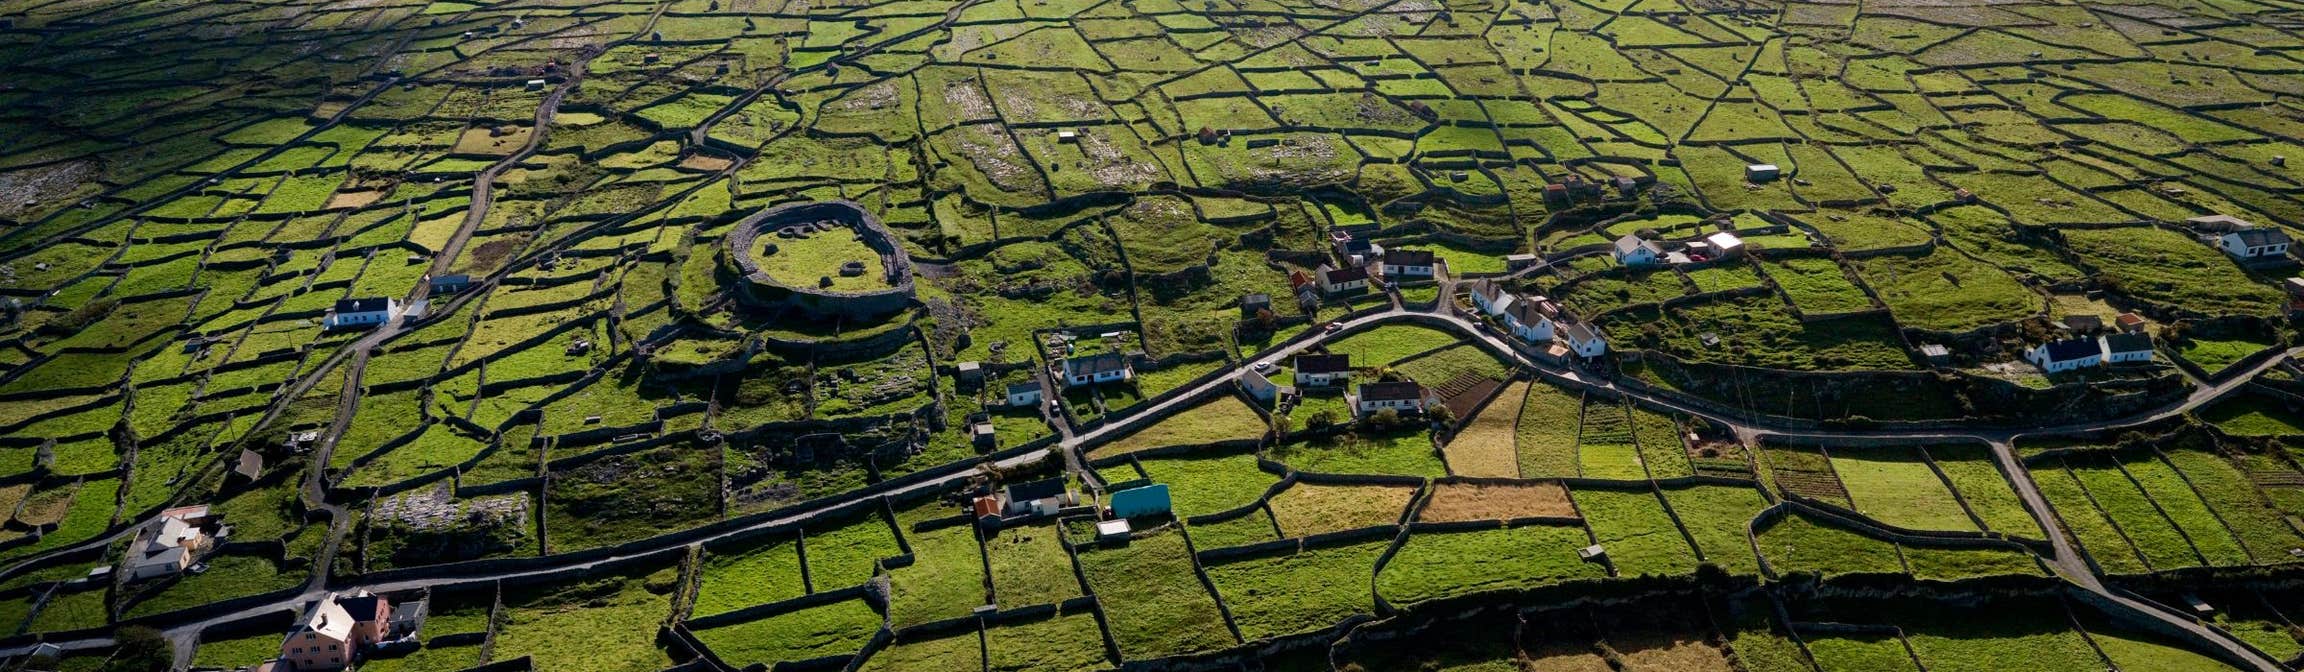 Image of Inishmaan in the Aran Islands in County Galway